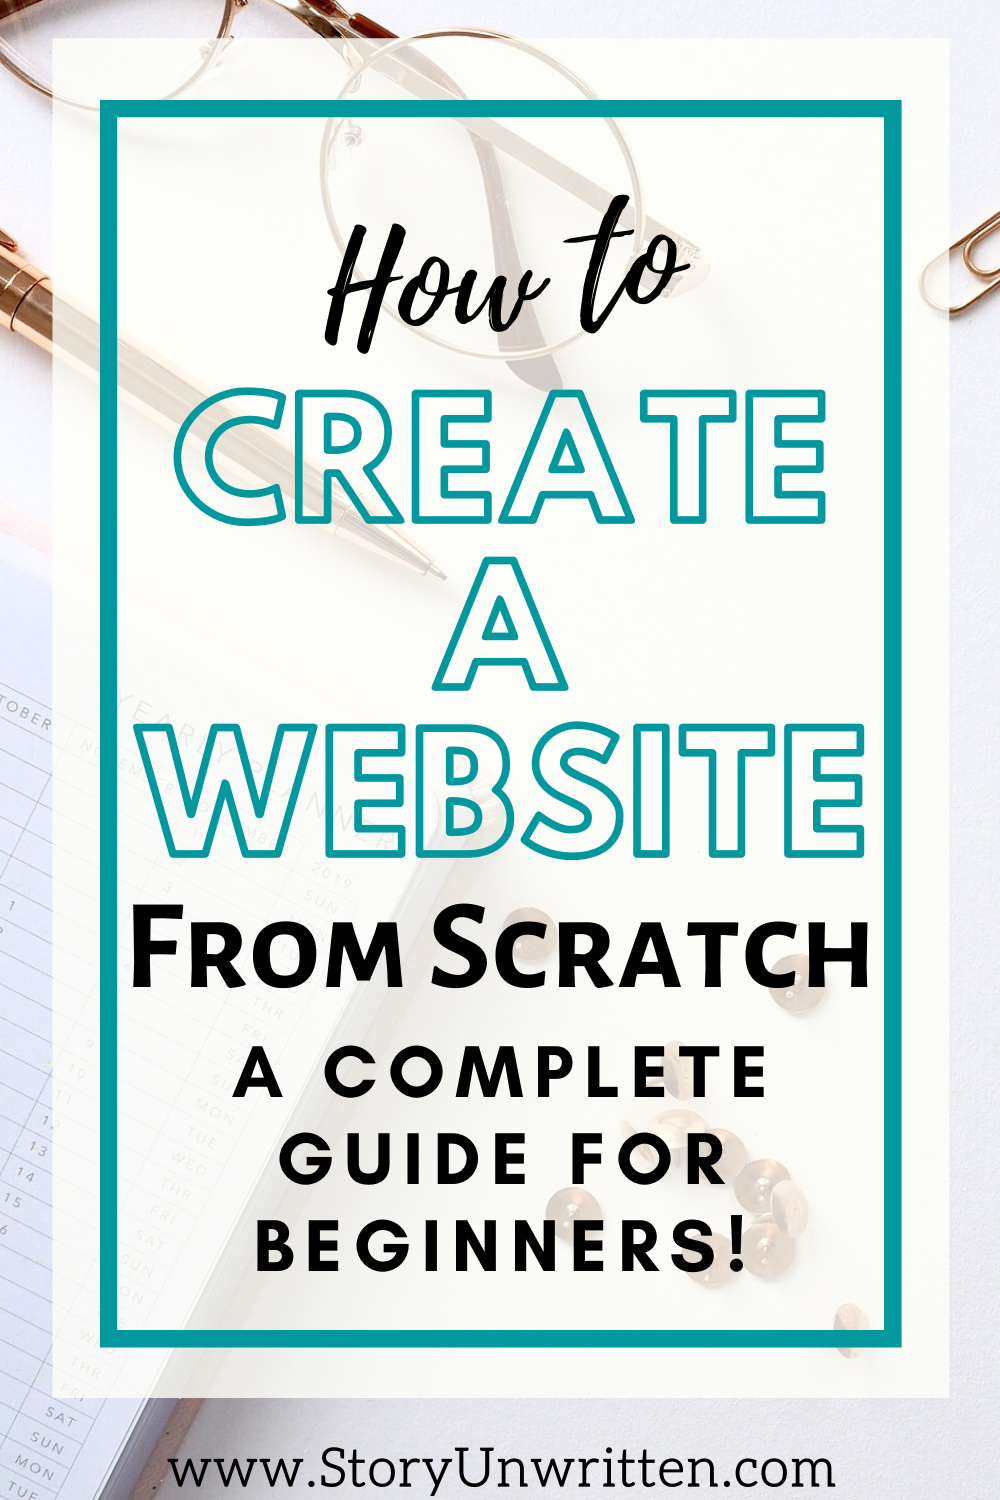 How to Create a Website from Scratch and Start a Blog - Story Unwritten